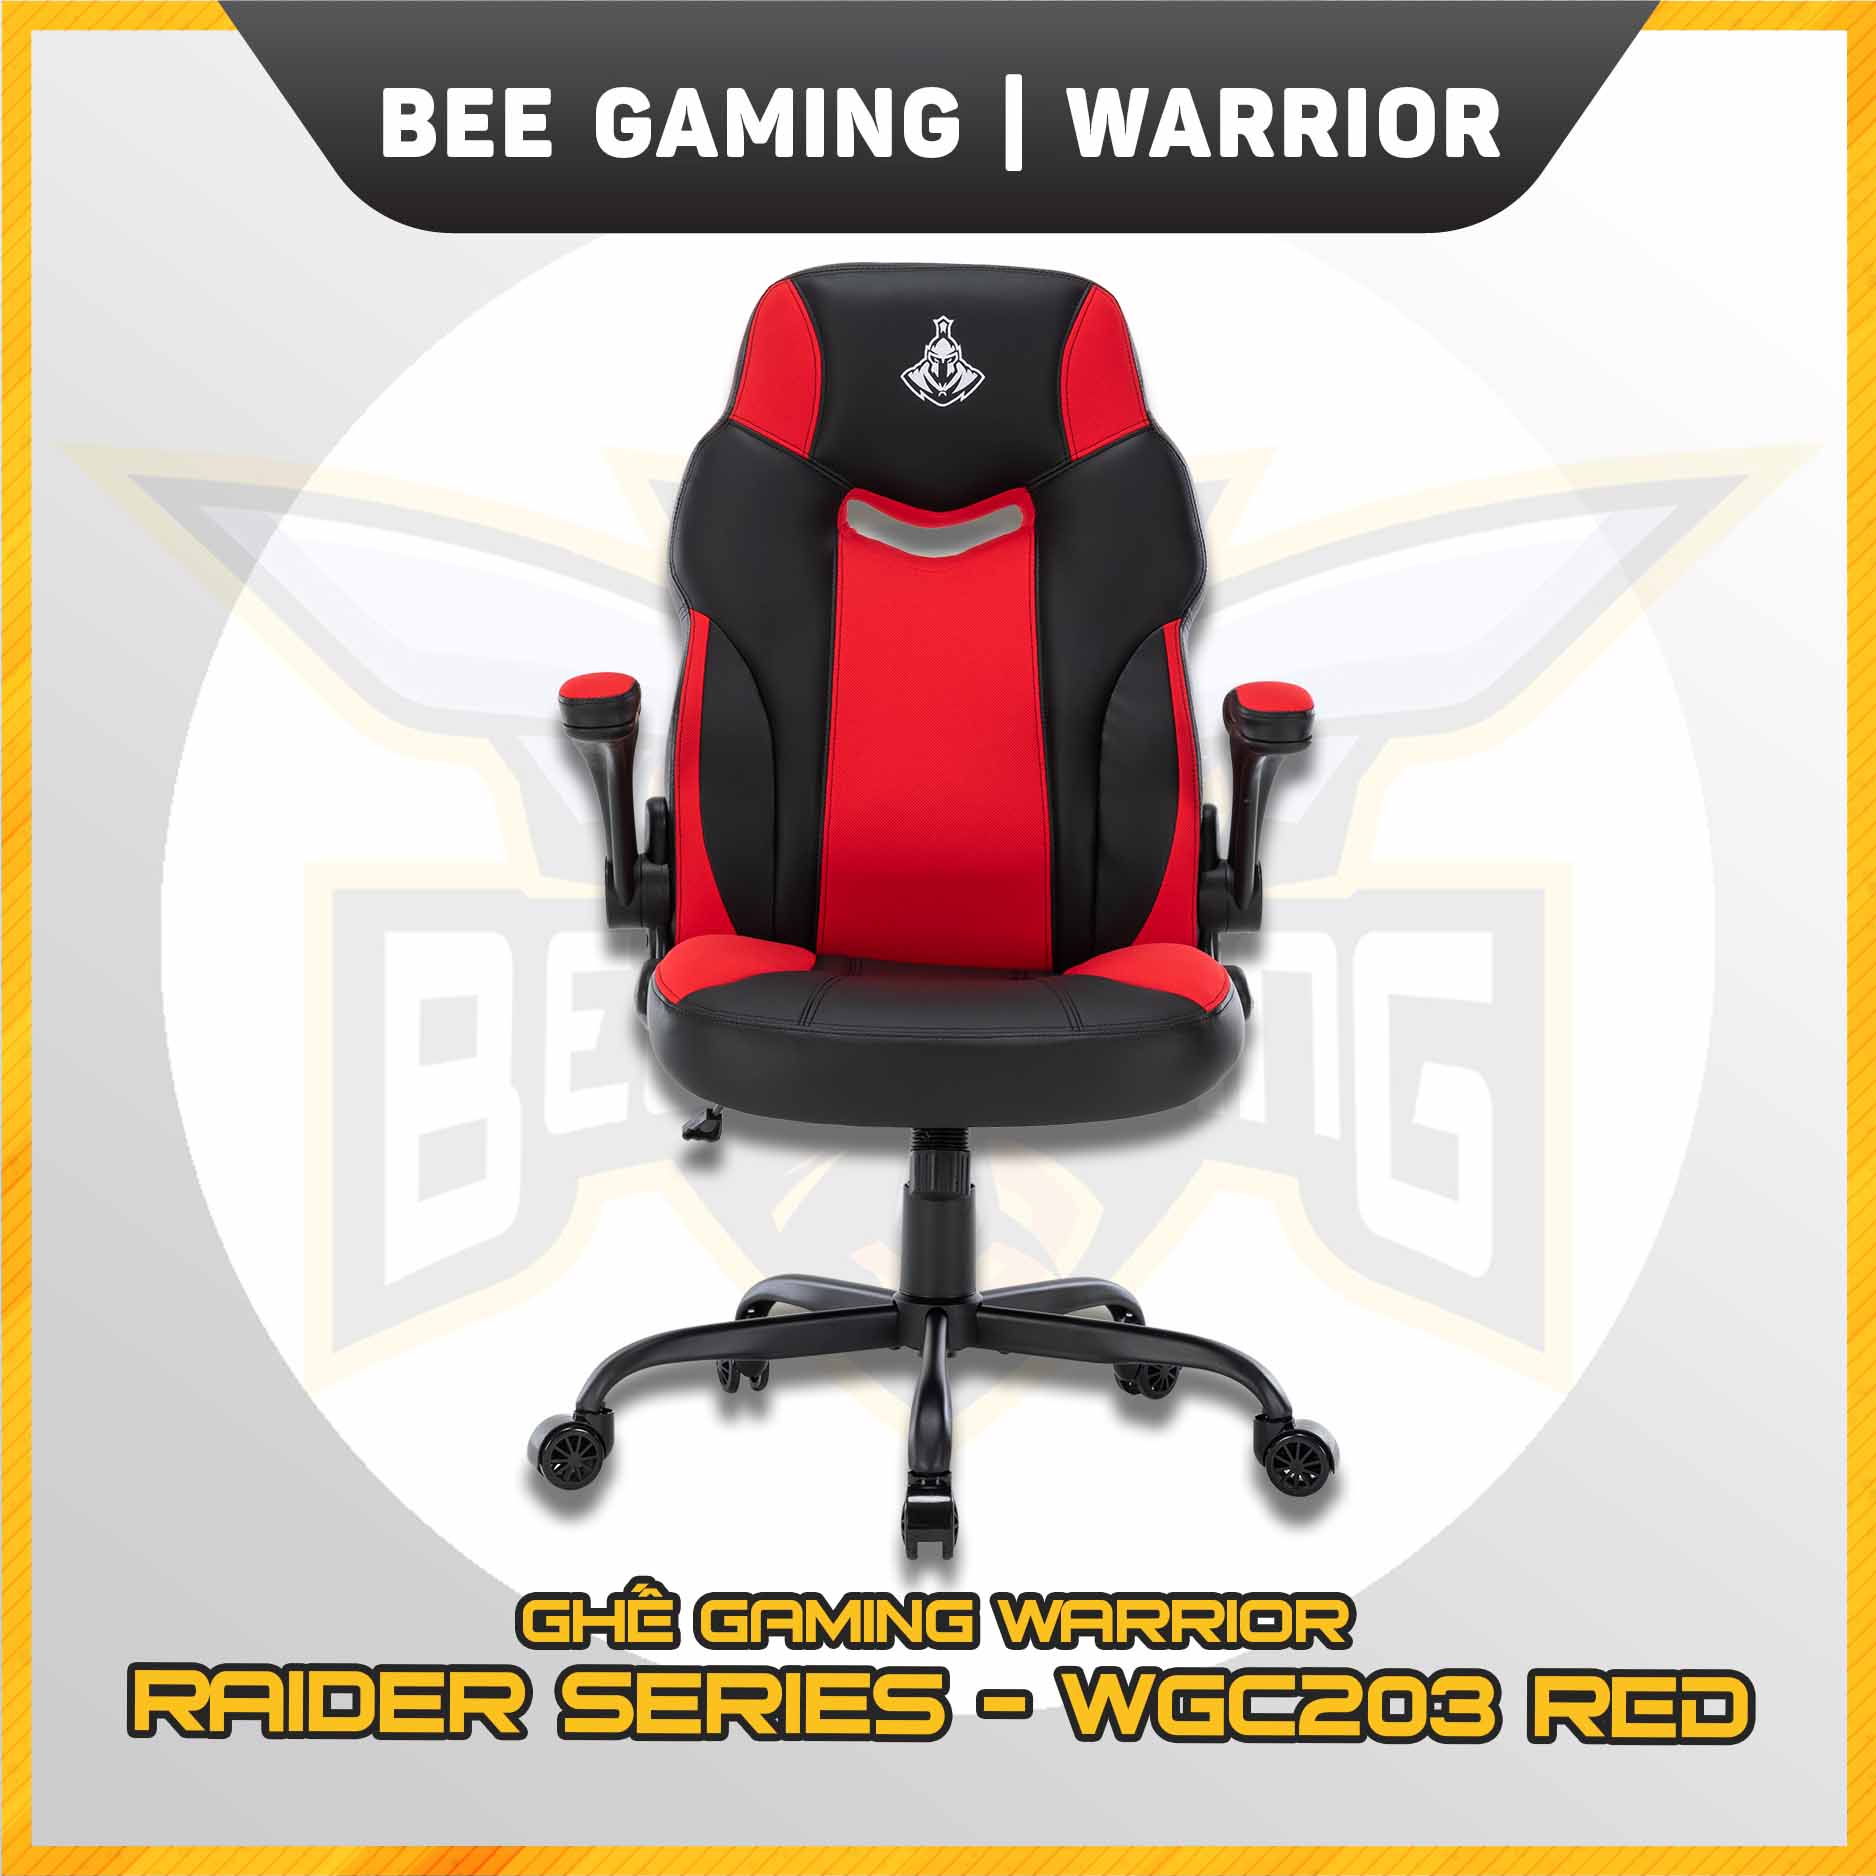 ghe-gaming-warrior-wgc203-red-beegaming-01